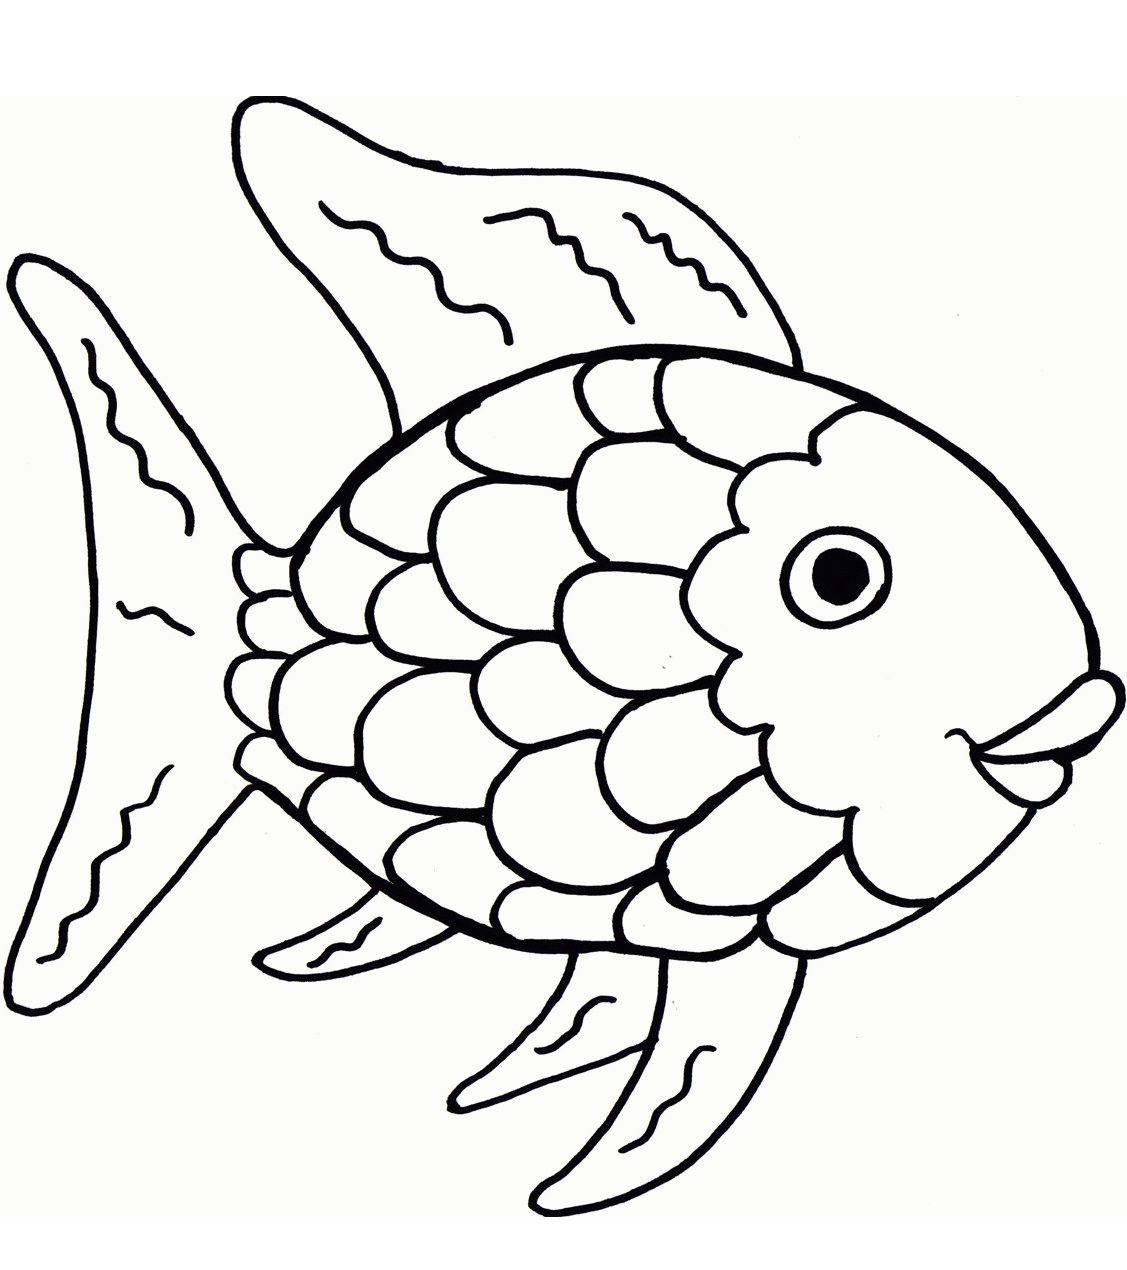 The Rainbow Fish Coloring Page   Free Printable Coloring Pages for ...